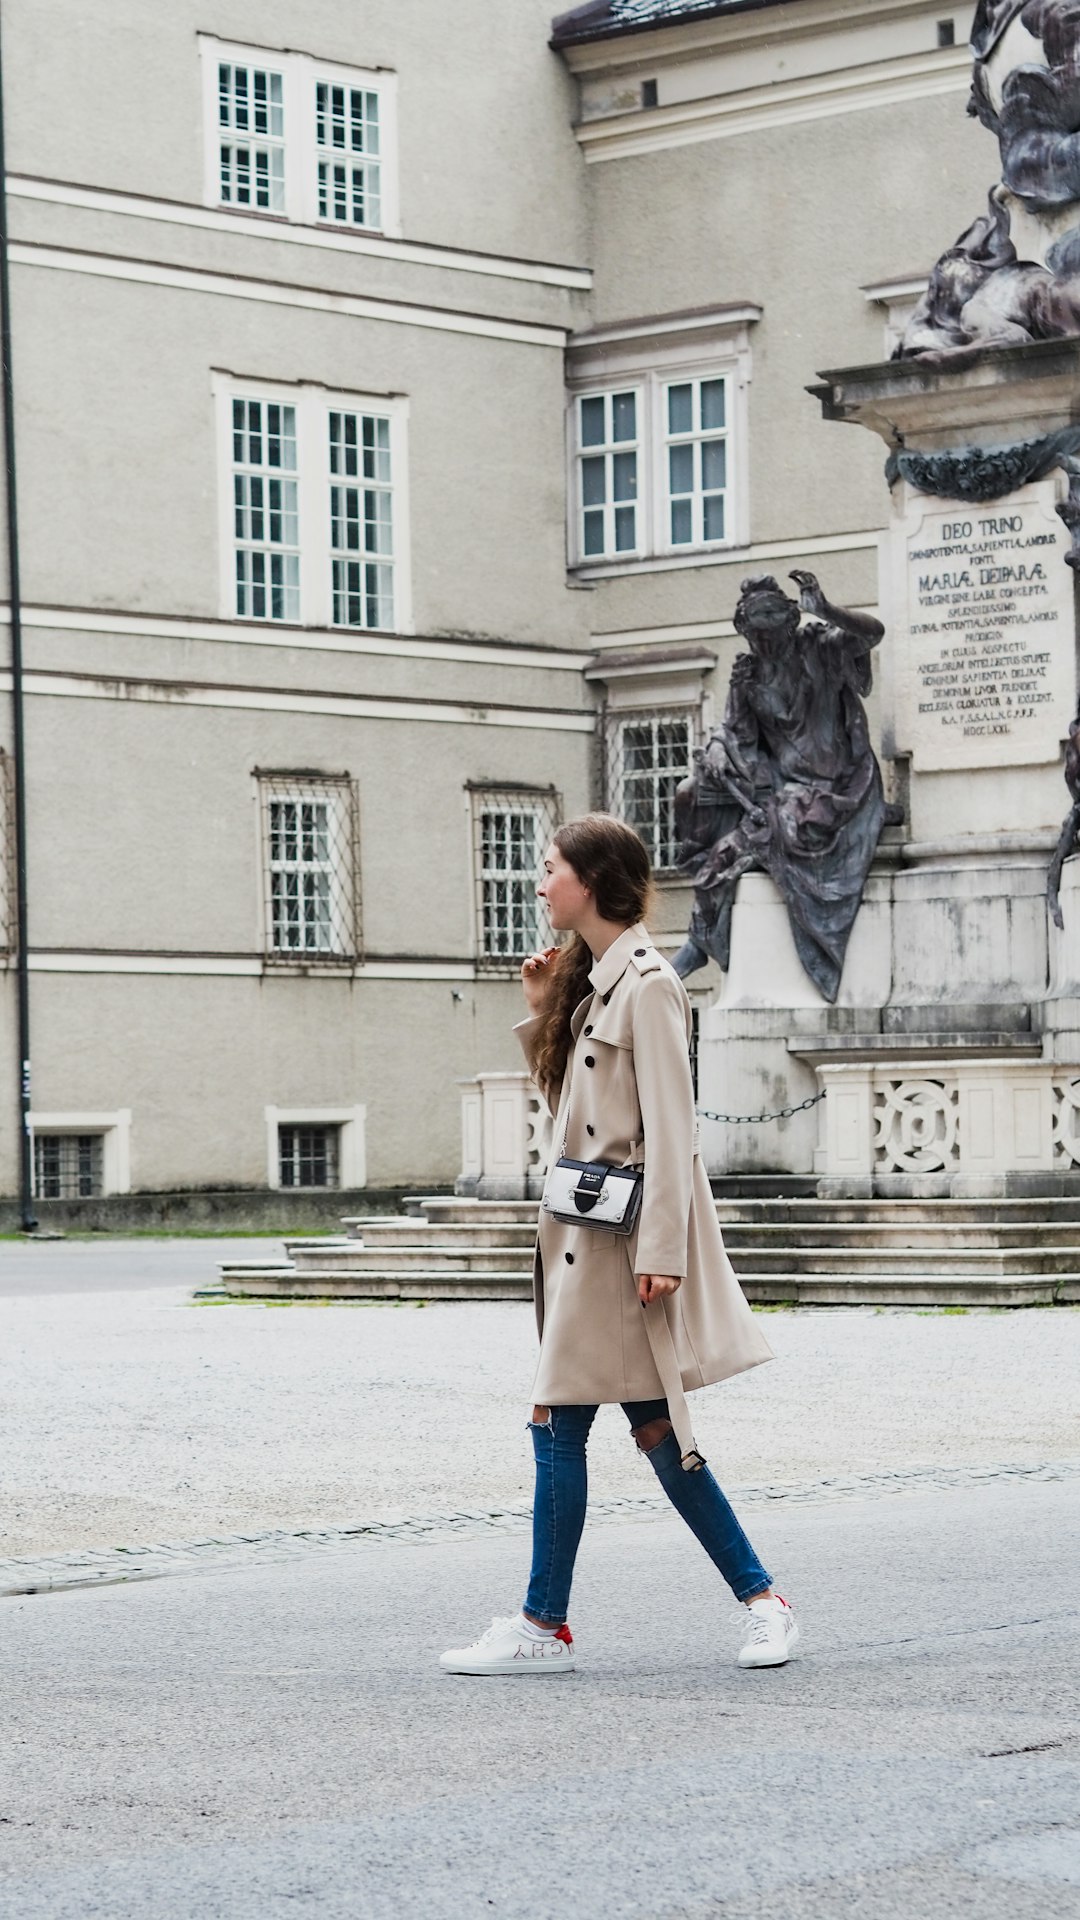 woman in brown coat standing near statue of man